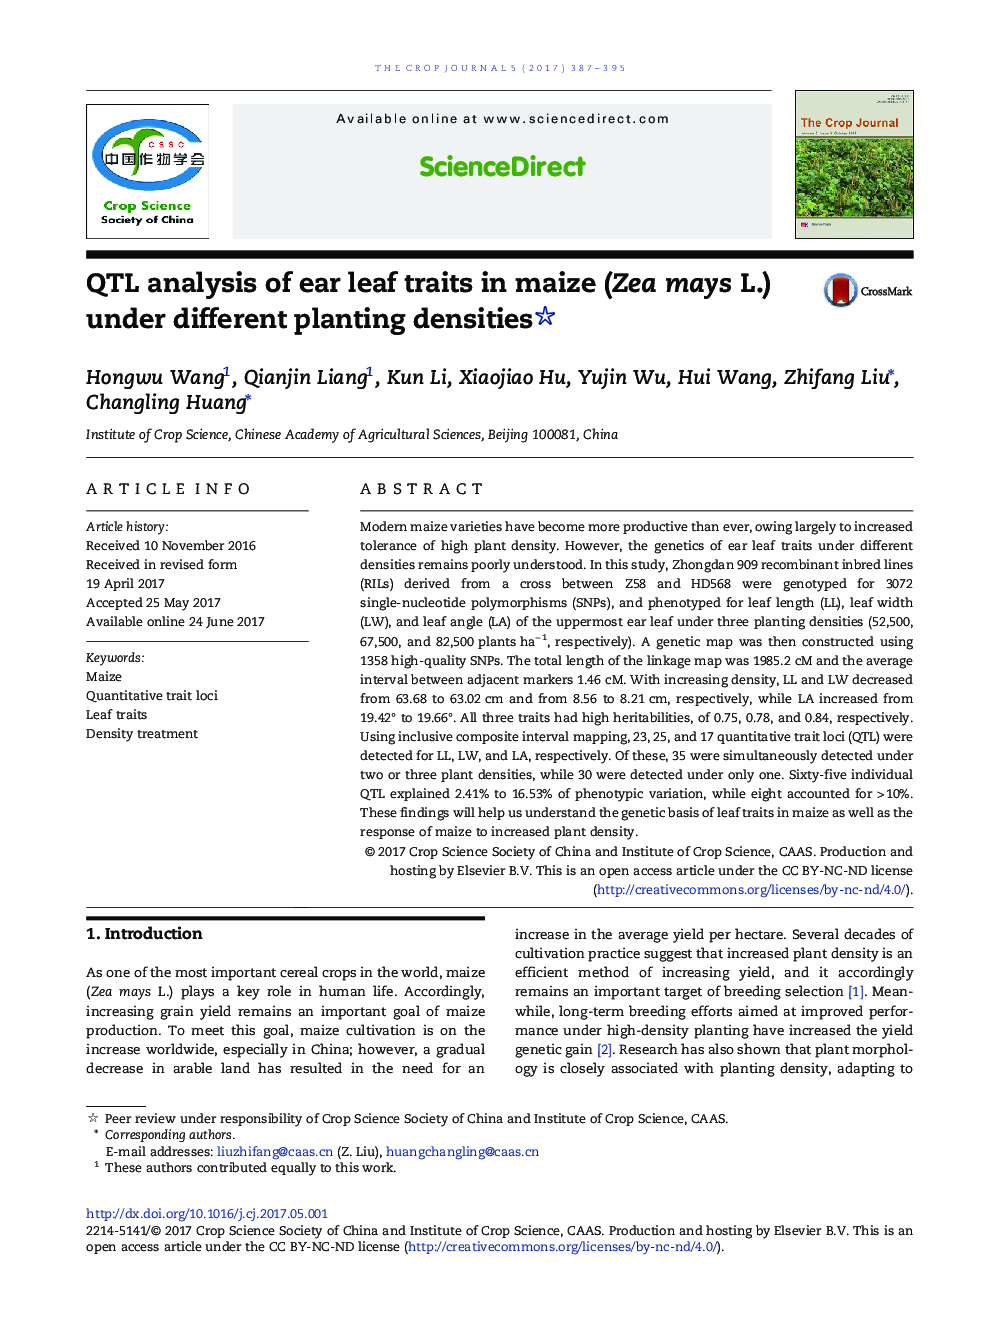 QTL analysis of ear leaf traits in maize (Zea mays L.) under different planting densities